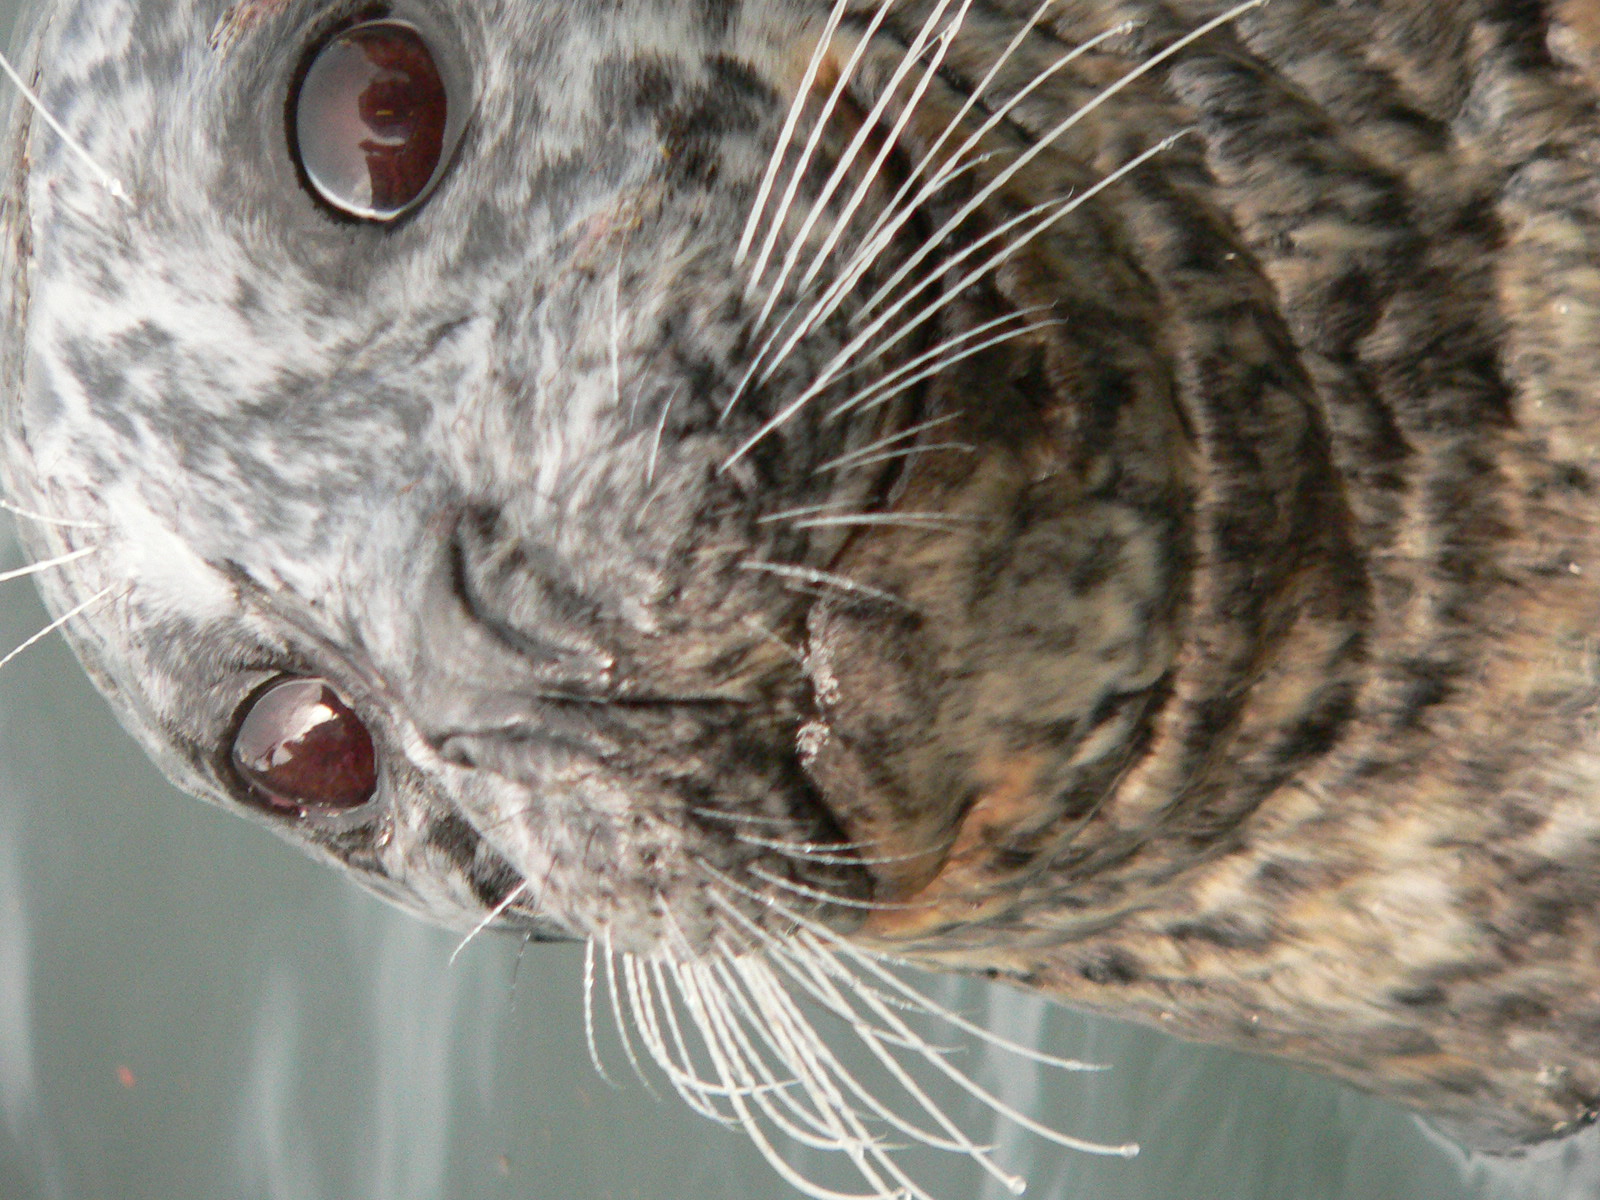 a close up view of the head of a seal with its eyes open